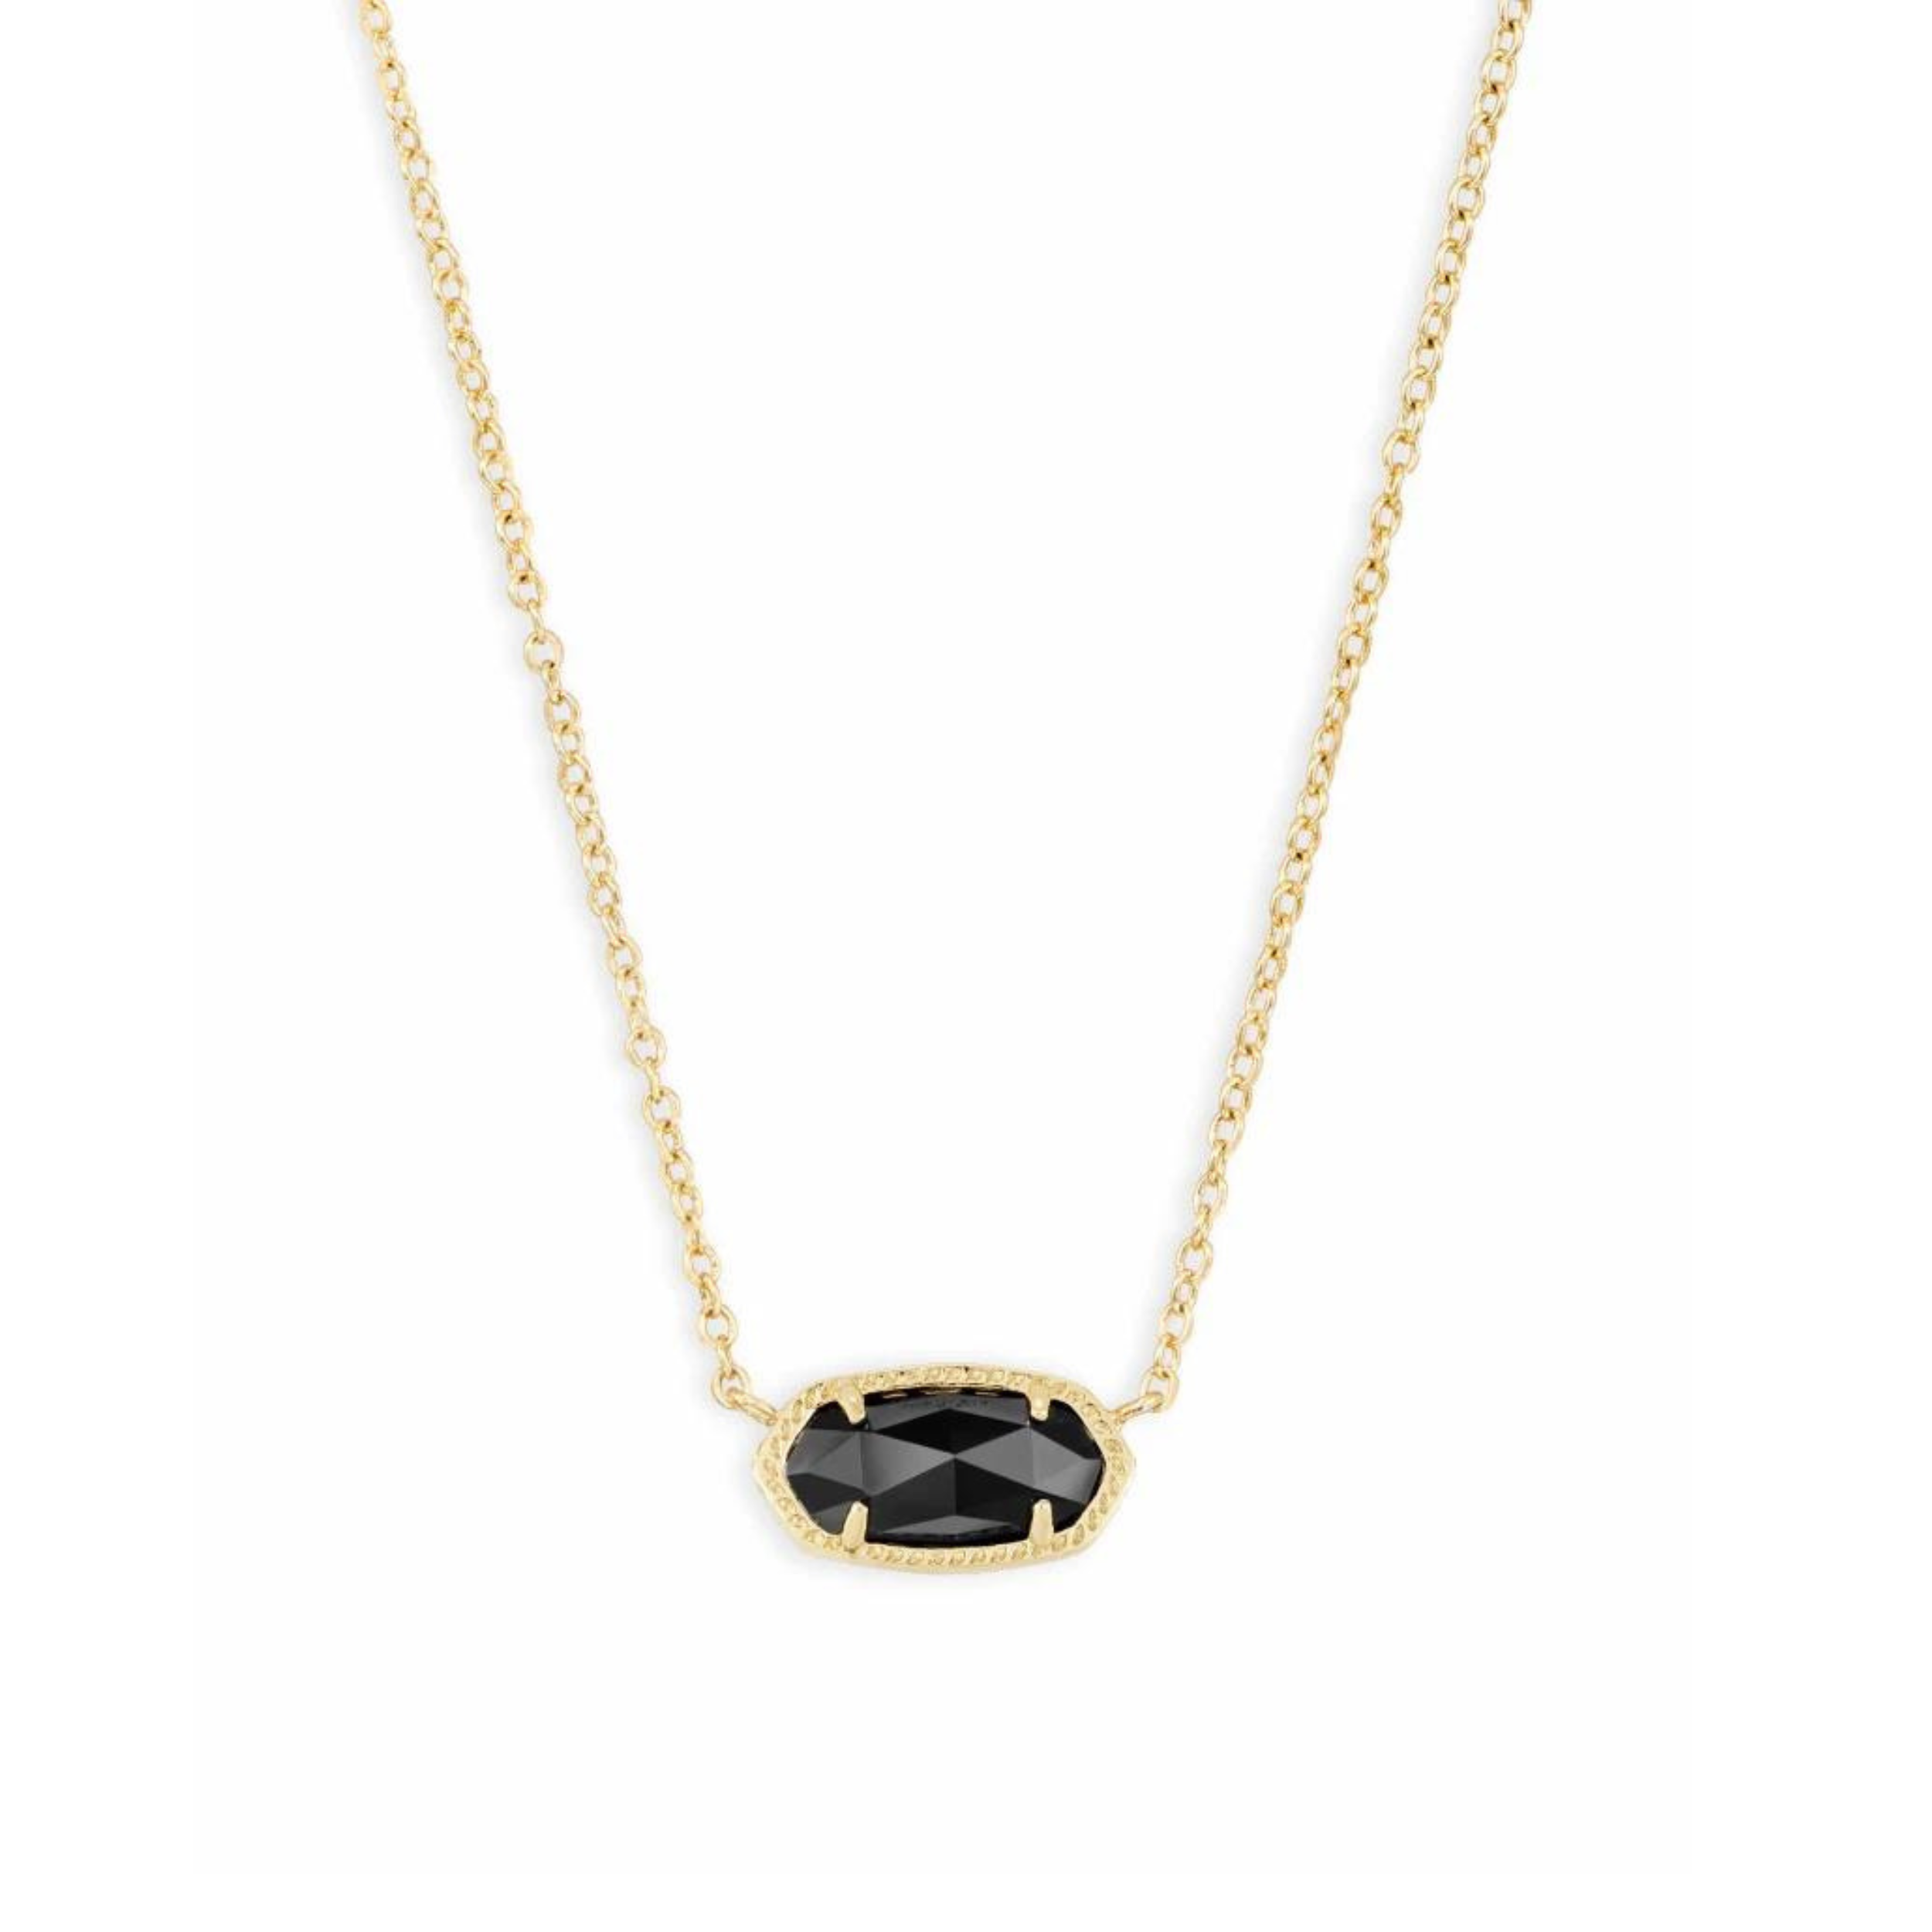 Gold pendant necklace with black stone, pictured on a white background.